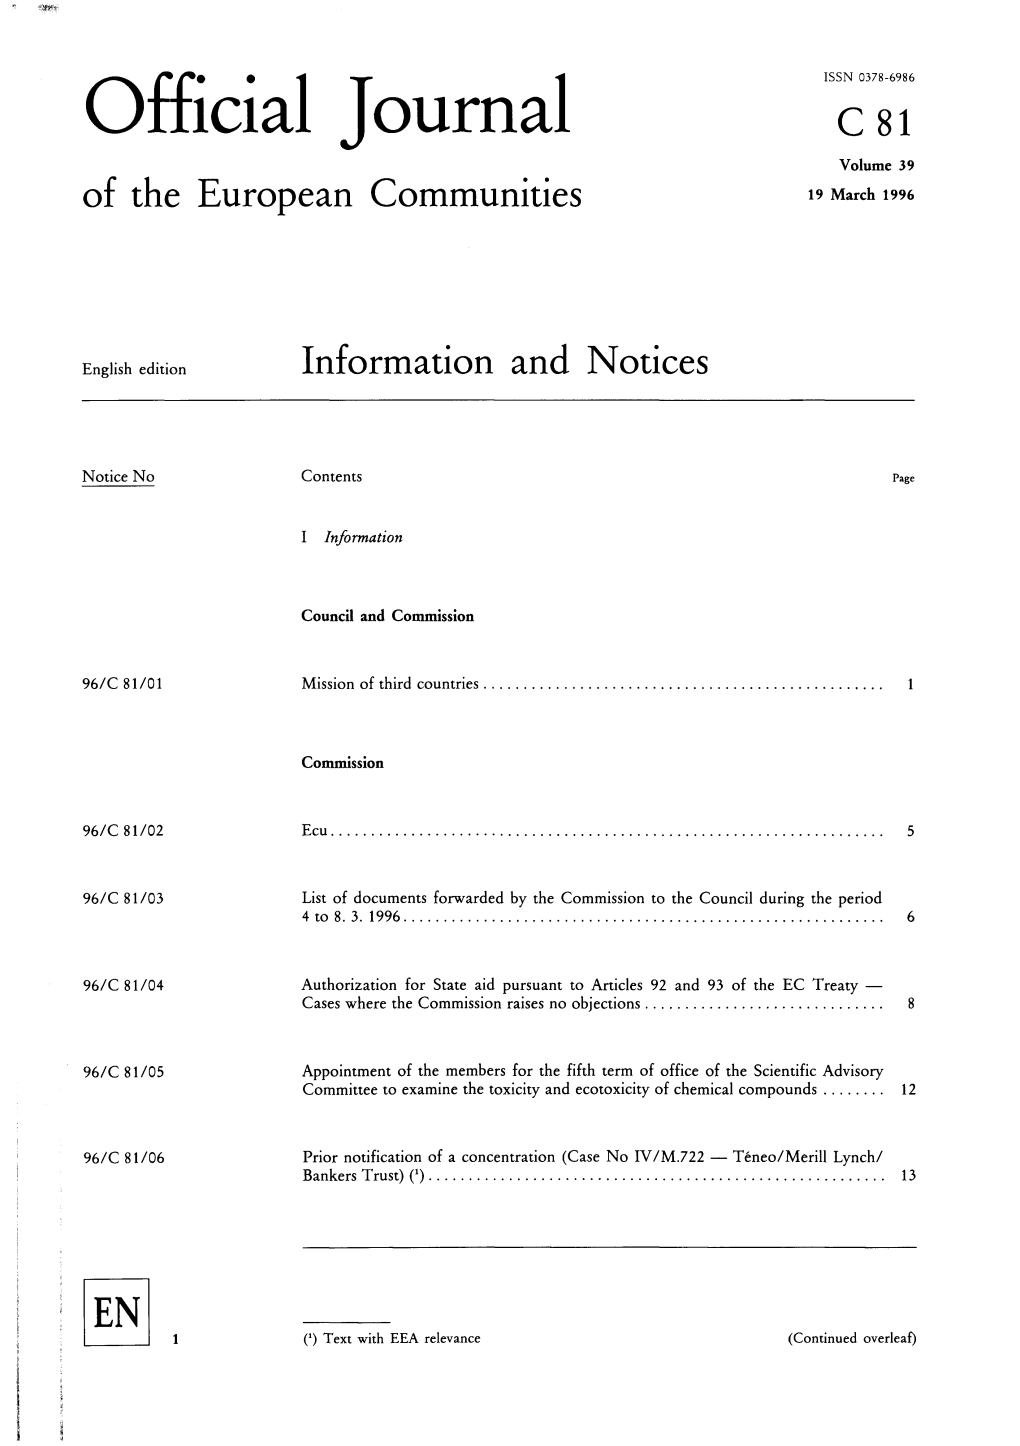 Official Journal C 81 Volume 39 of the European Communities 19 March 1996